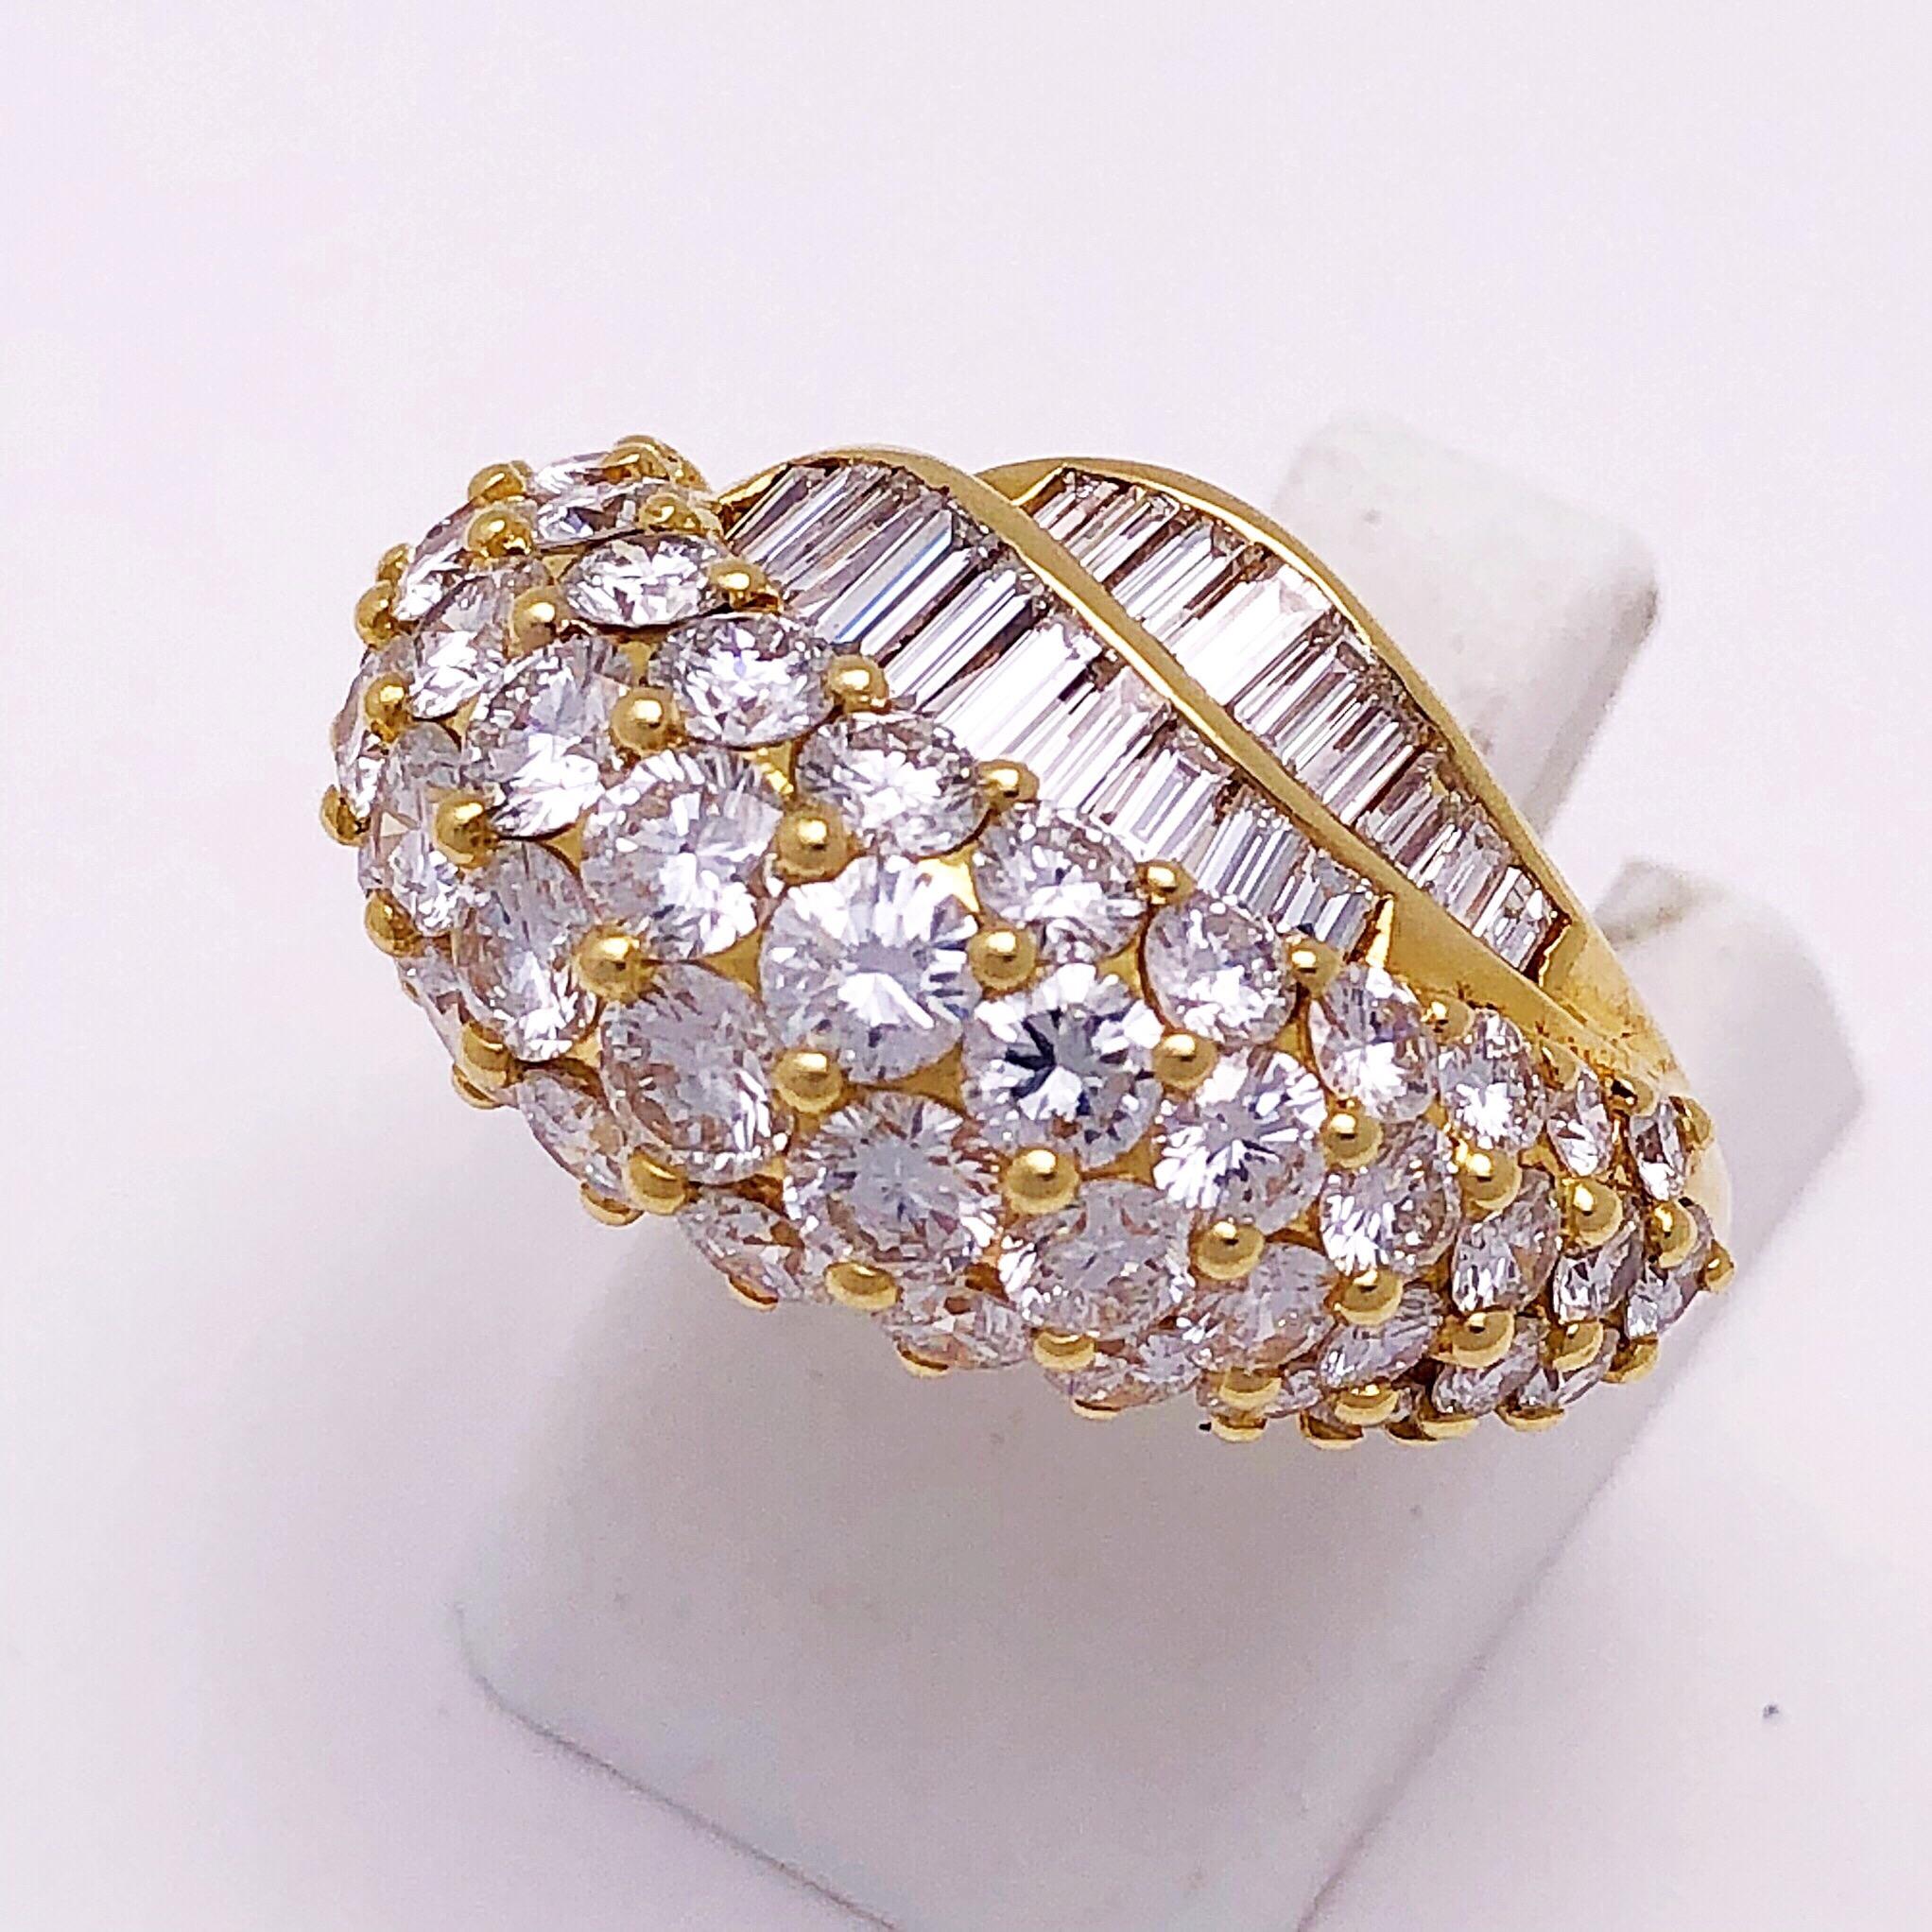 Contemporary Picchiotti 18 Karat Yellow Gold and 3.87 Carat Diamond Cocktail Ring For Sale